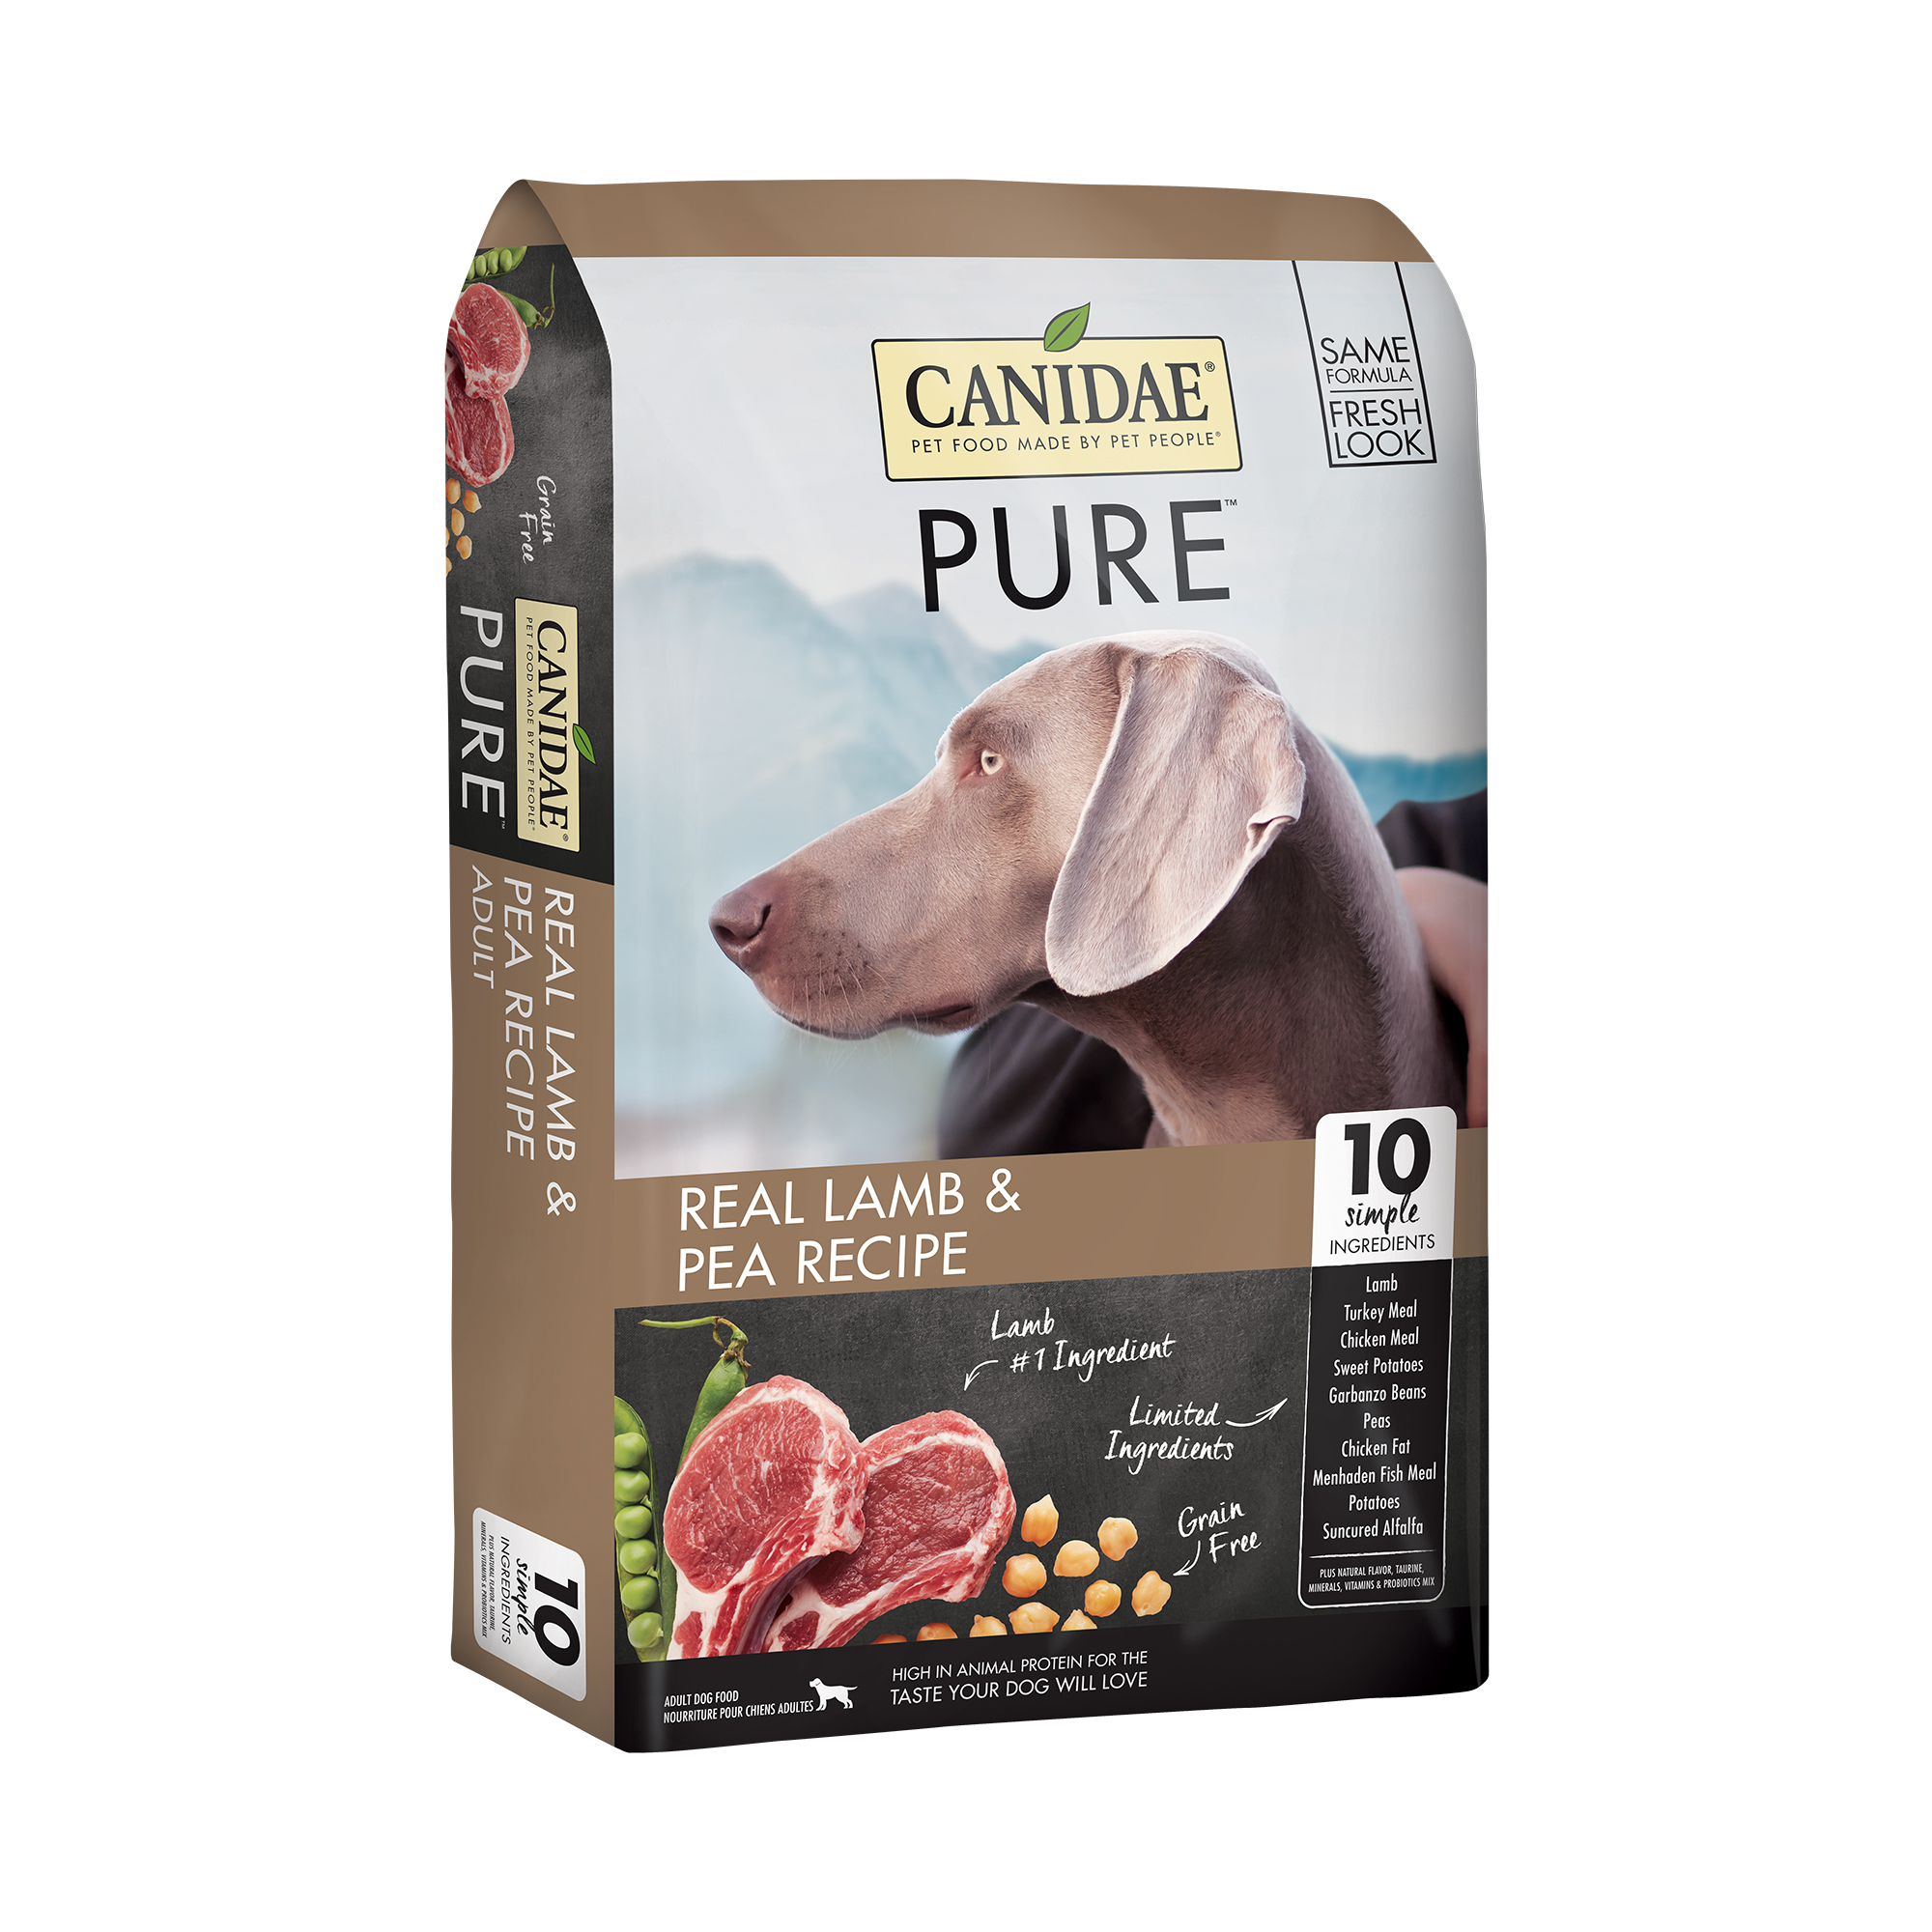 CANIDAE PURE Grain Free Limited Ingredient Real Lamb & Pea Dry Dog Food